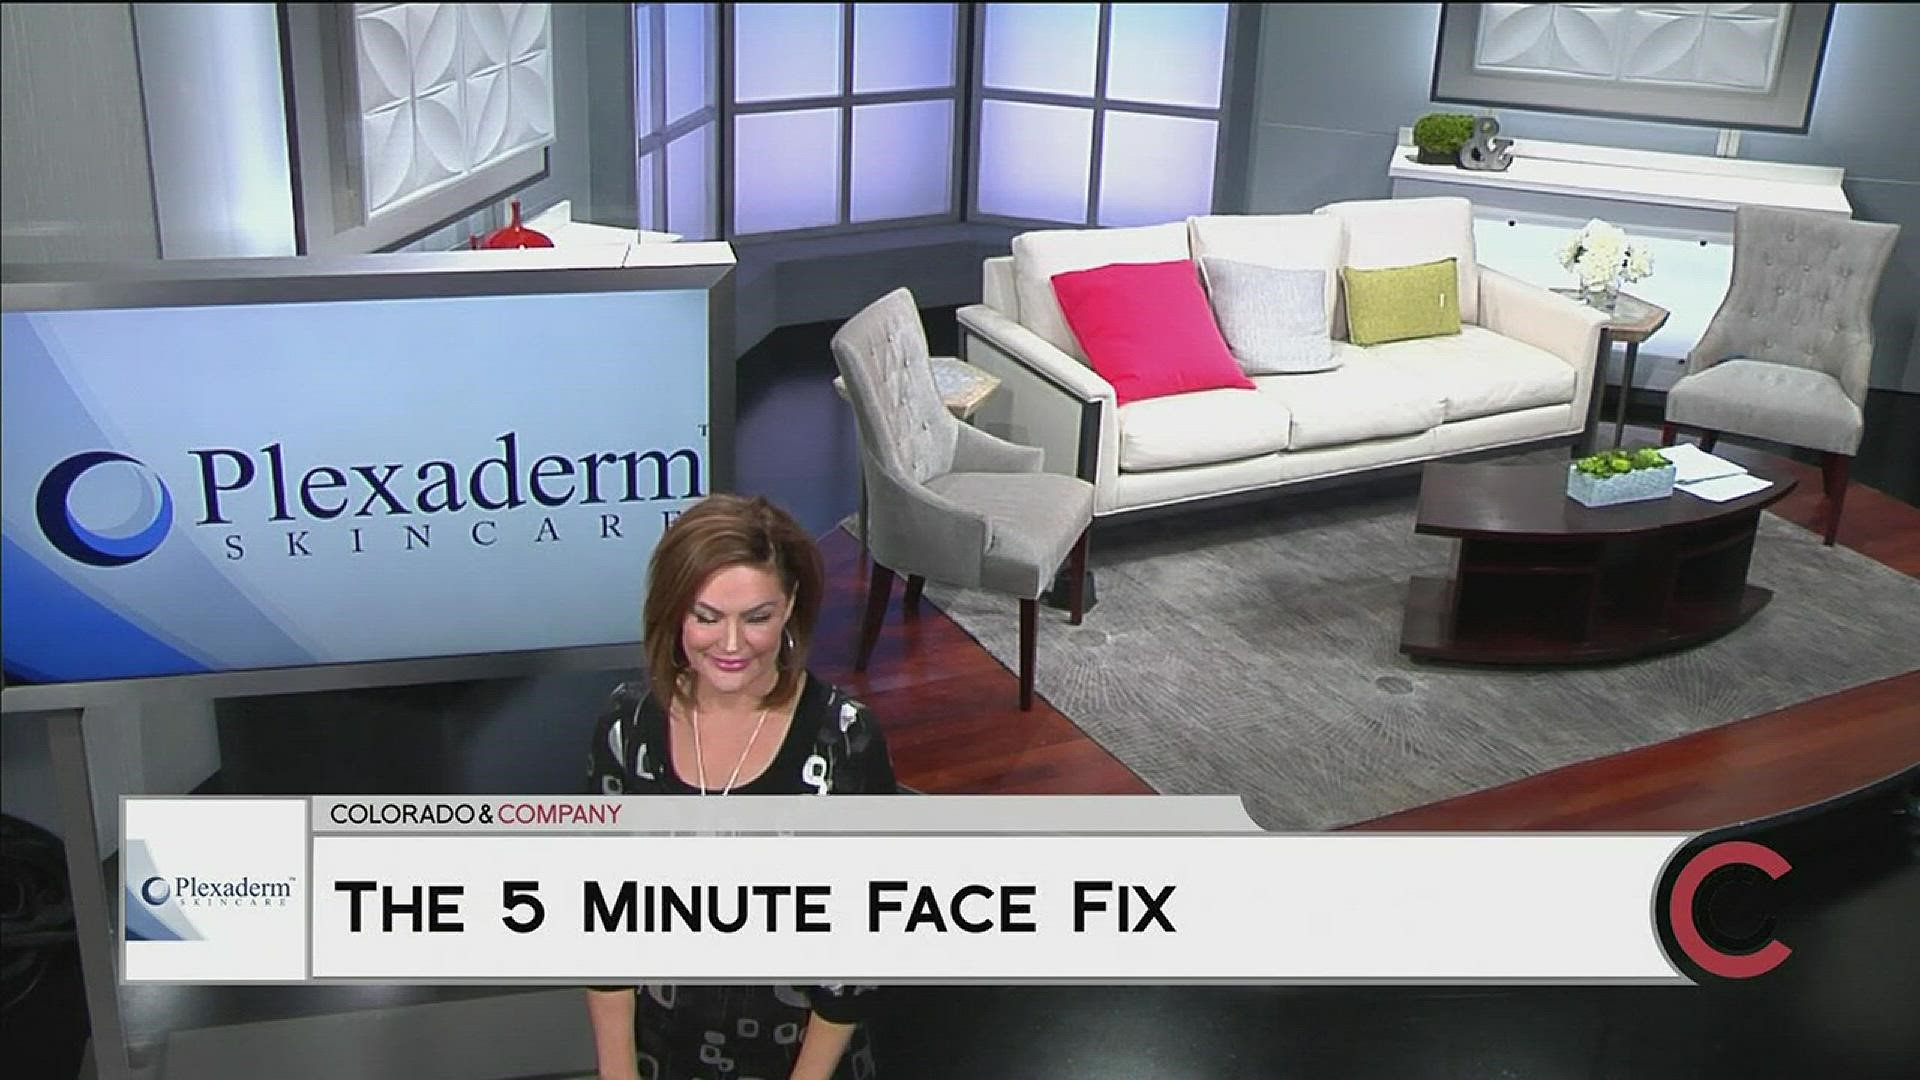 We’ve all wasted money on beauty products that just don’t work. This one does! Right now, all Colorado and Company viewers can get Plexaderm for up to 50% off with free shipping. Order yours online at www.Plexaderm.com, or by calling 800.906.6743.
THIS INTERVIEW HAS COMMERCIAL CONTENT. PRODUCTS AND SERVICES FEATURED APPEAR AS PAID ADVERTISING.